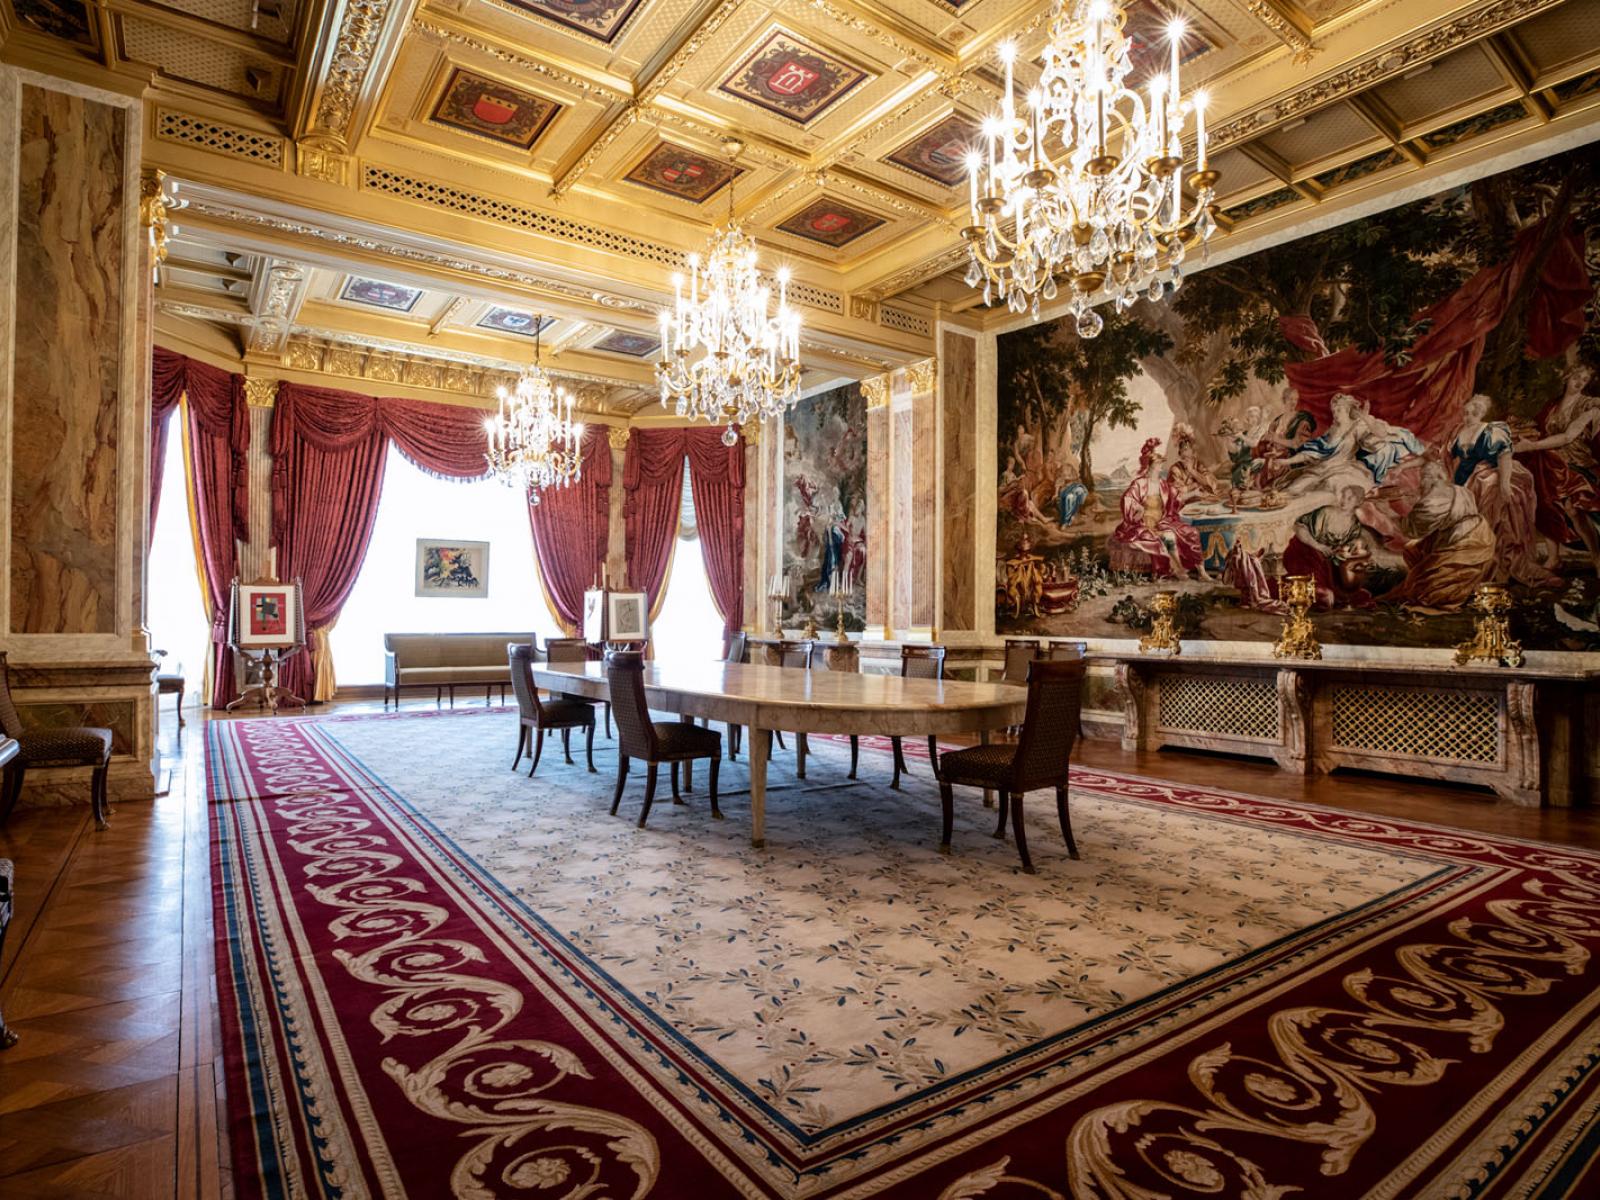 The dining room of the Palais grand-ducal